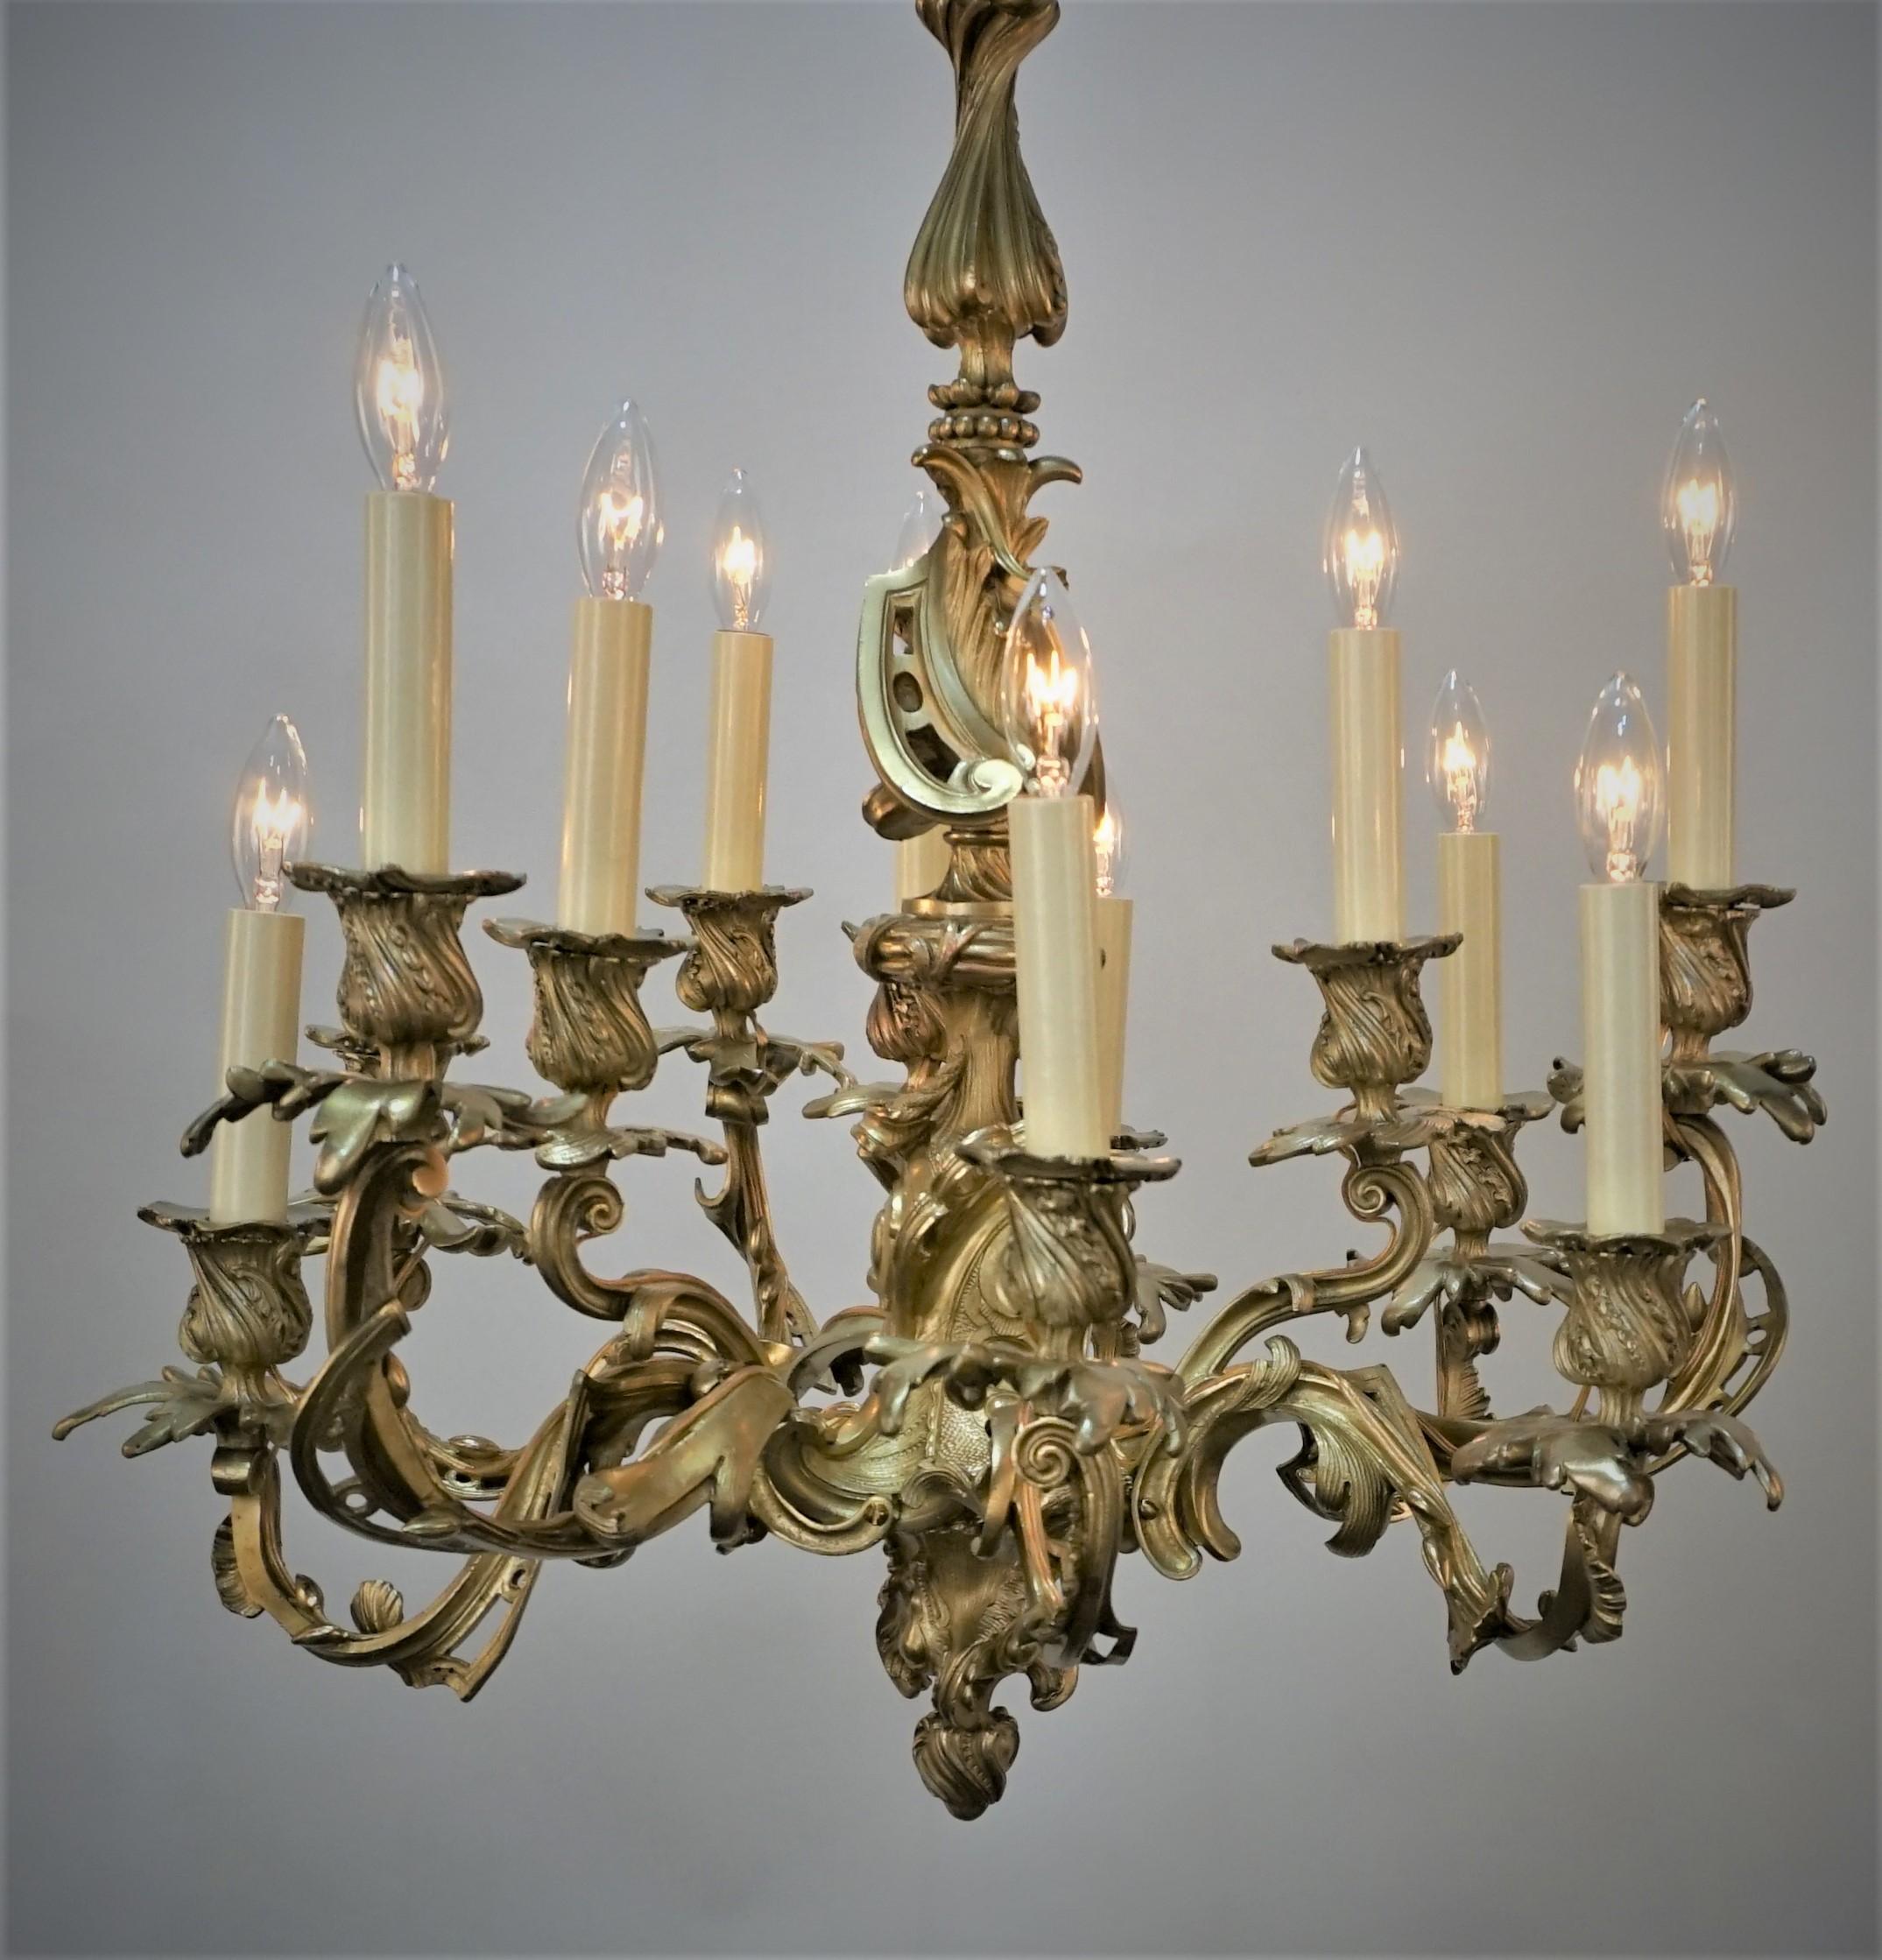 19th Century French Bronze Chandelier In Good Condition For Sale In Fairfax, VA